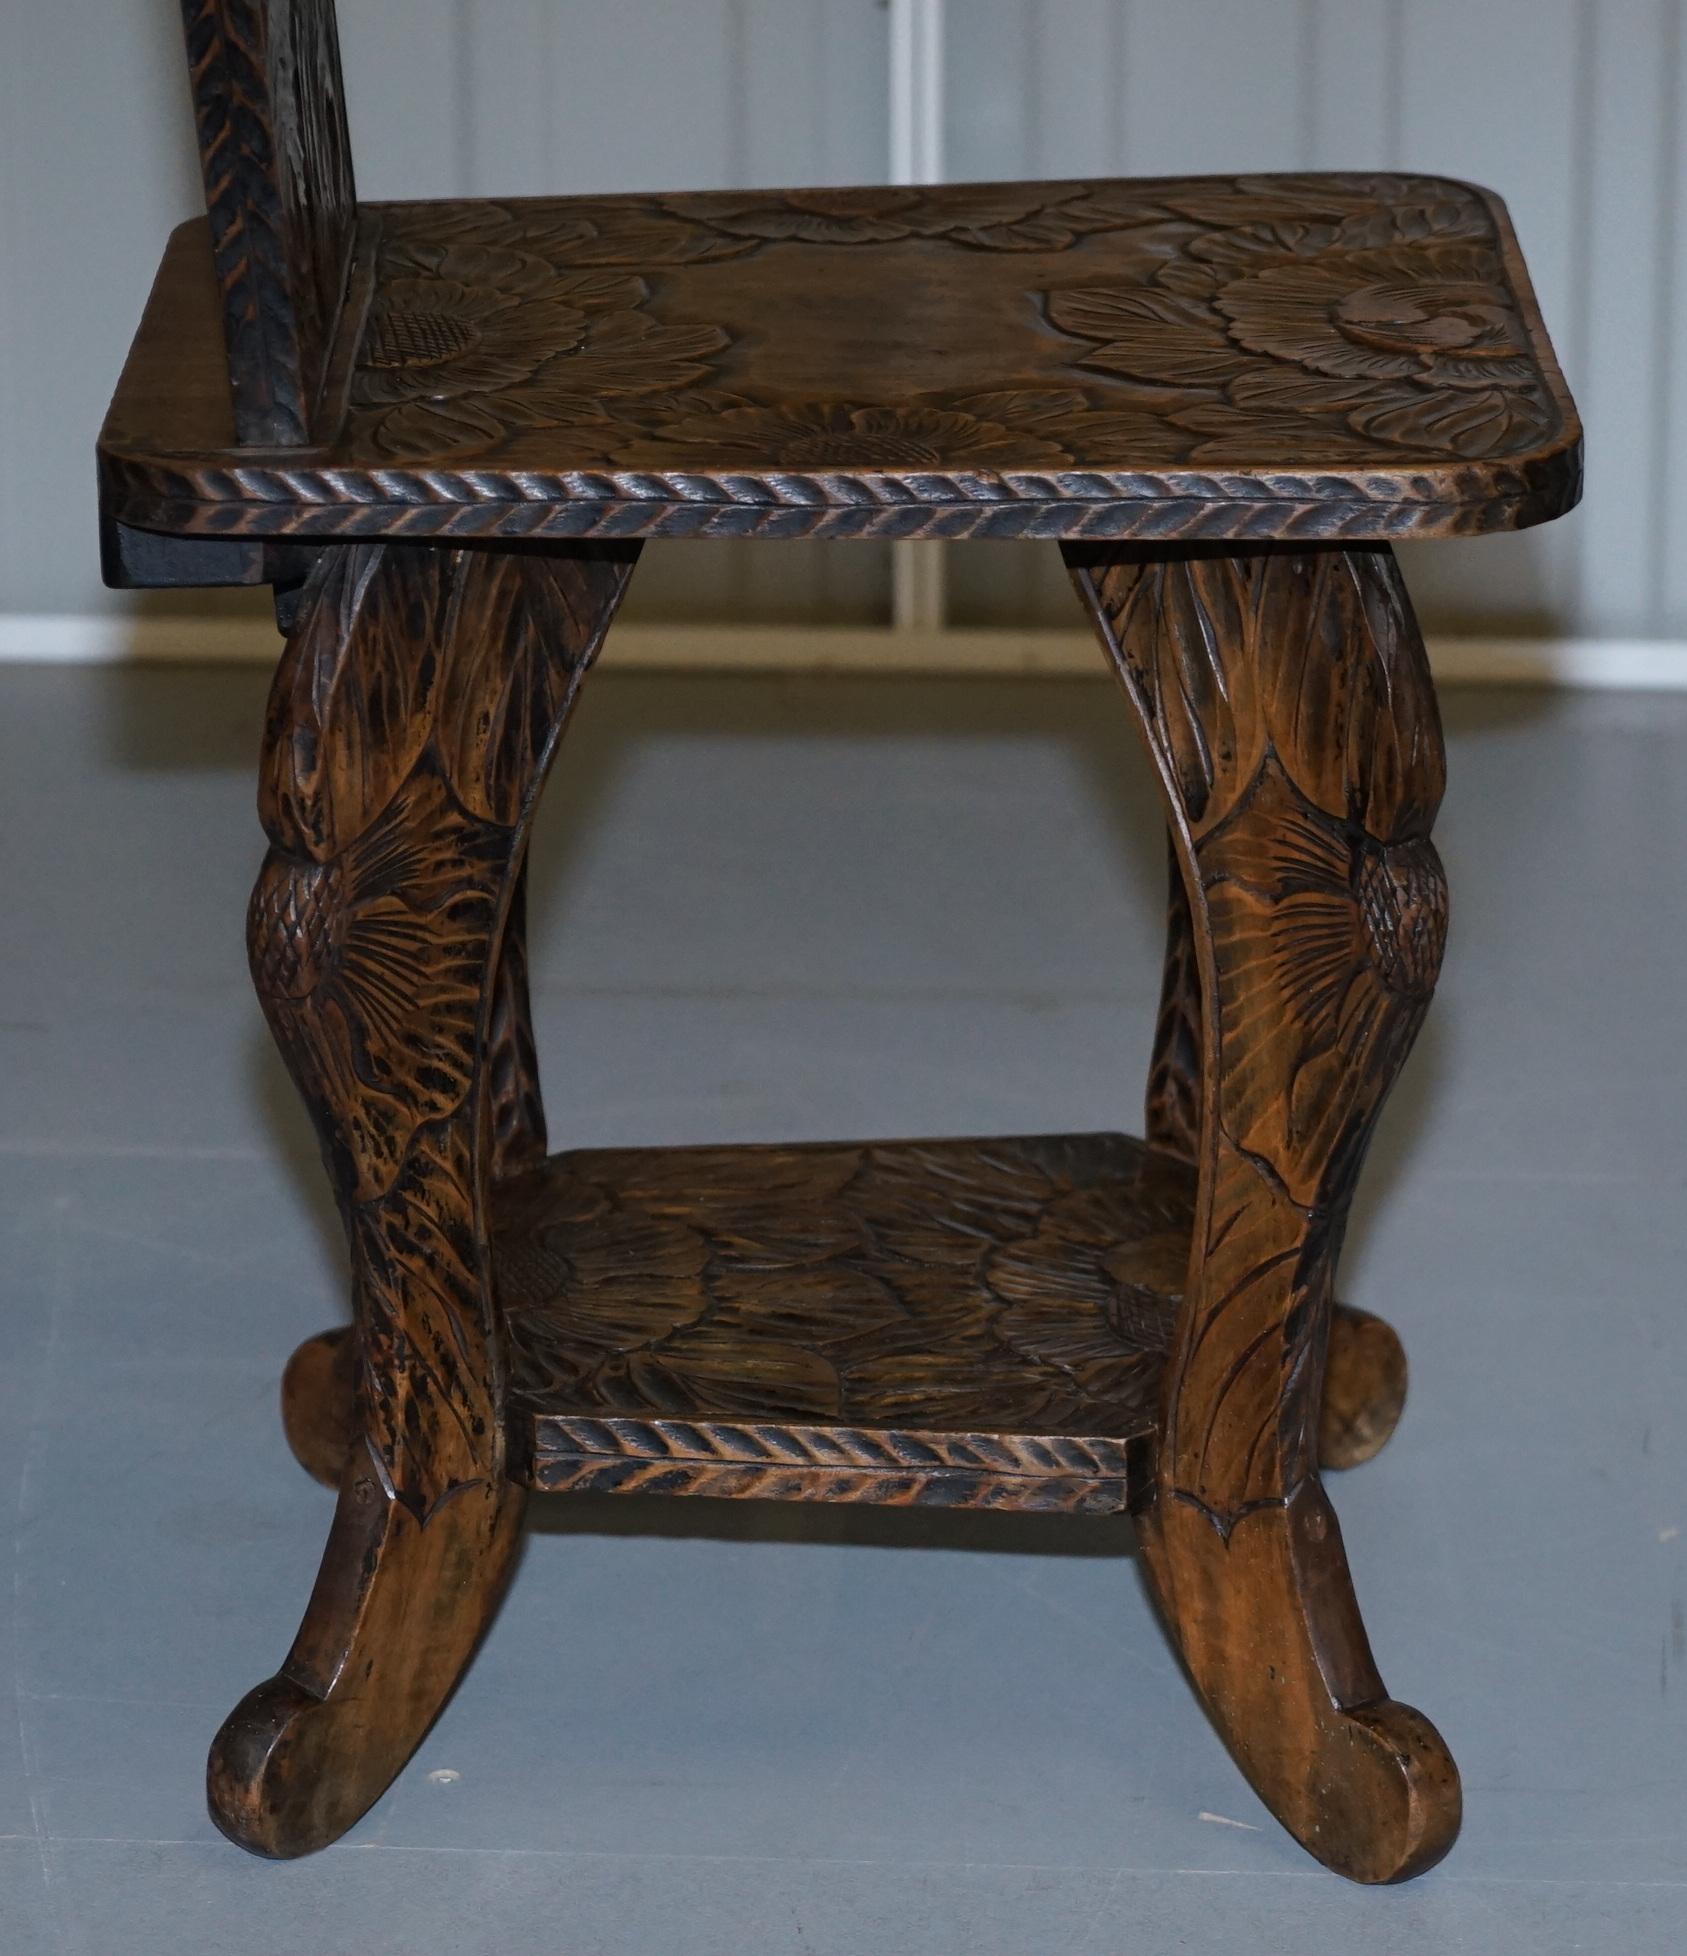 Very Rare Original Liberty's London Signed Qing Dynasty Chair Floral Carving For Sale 3